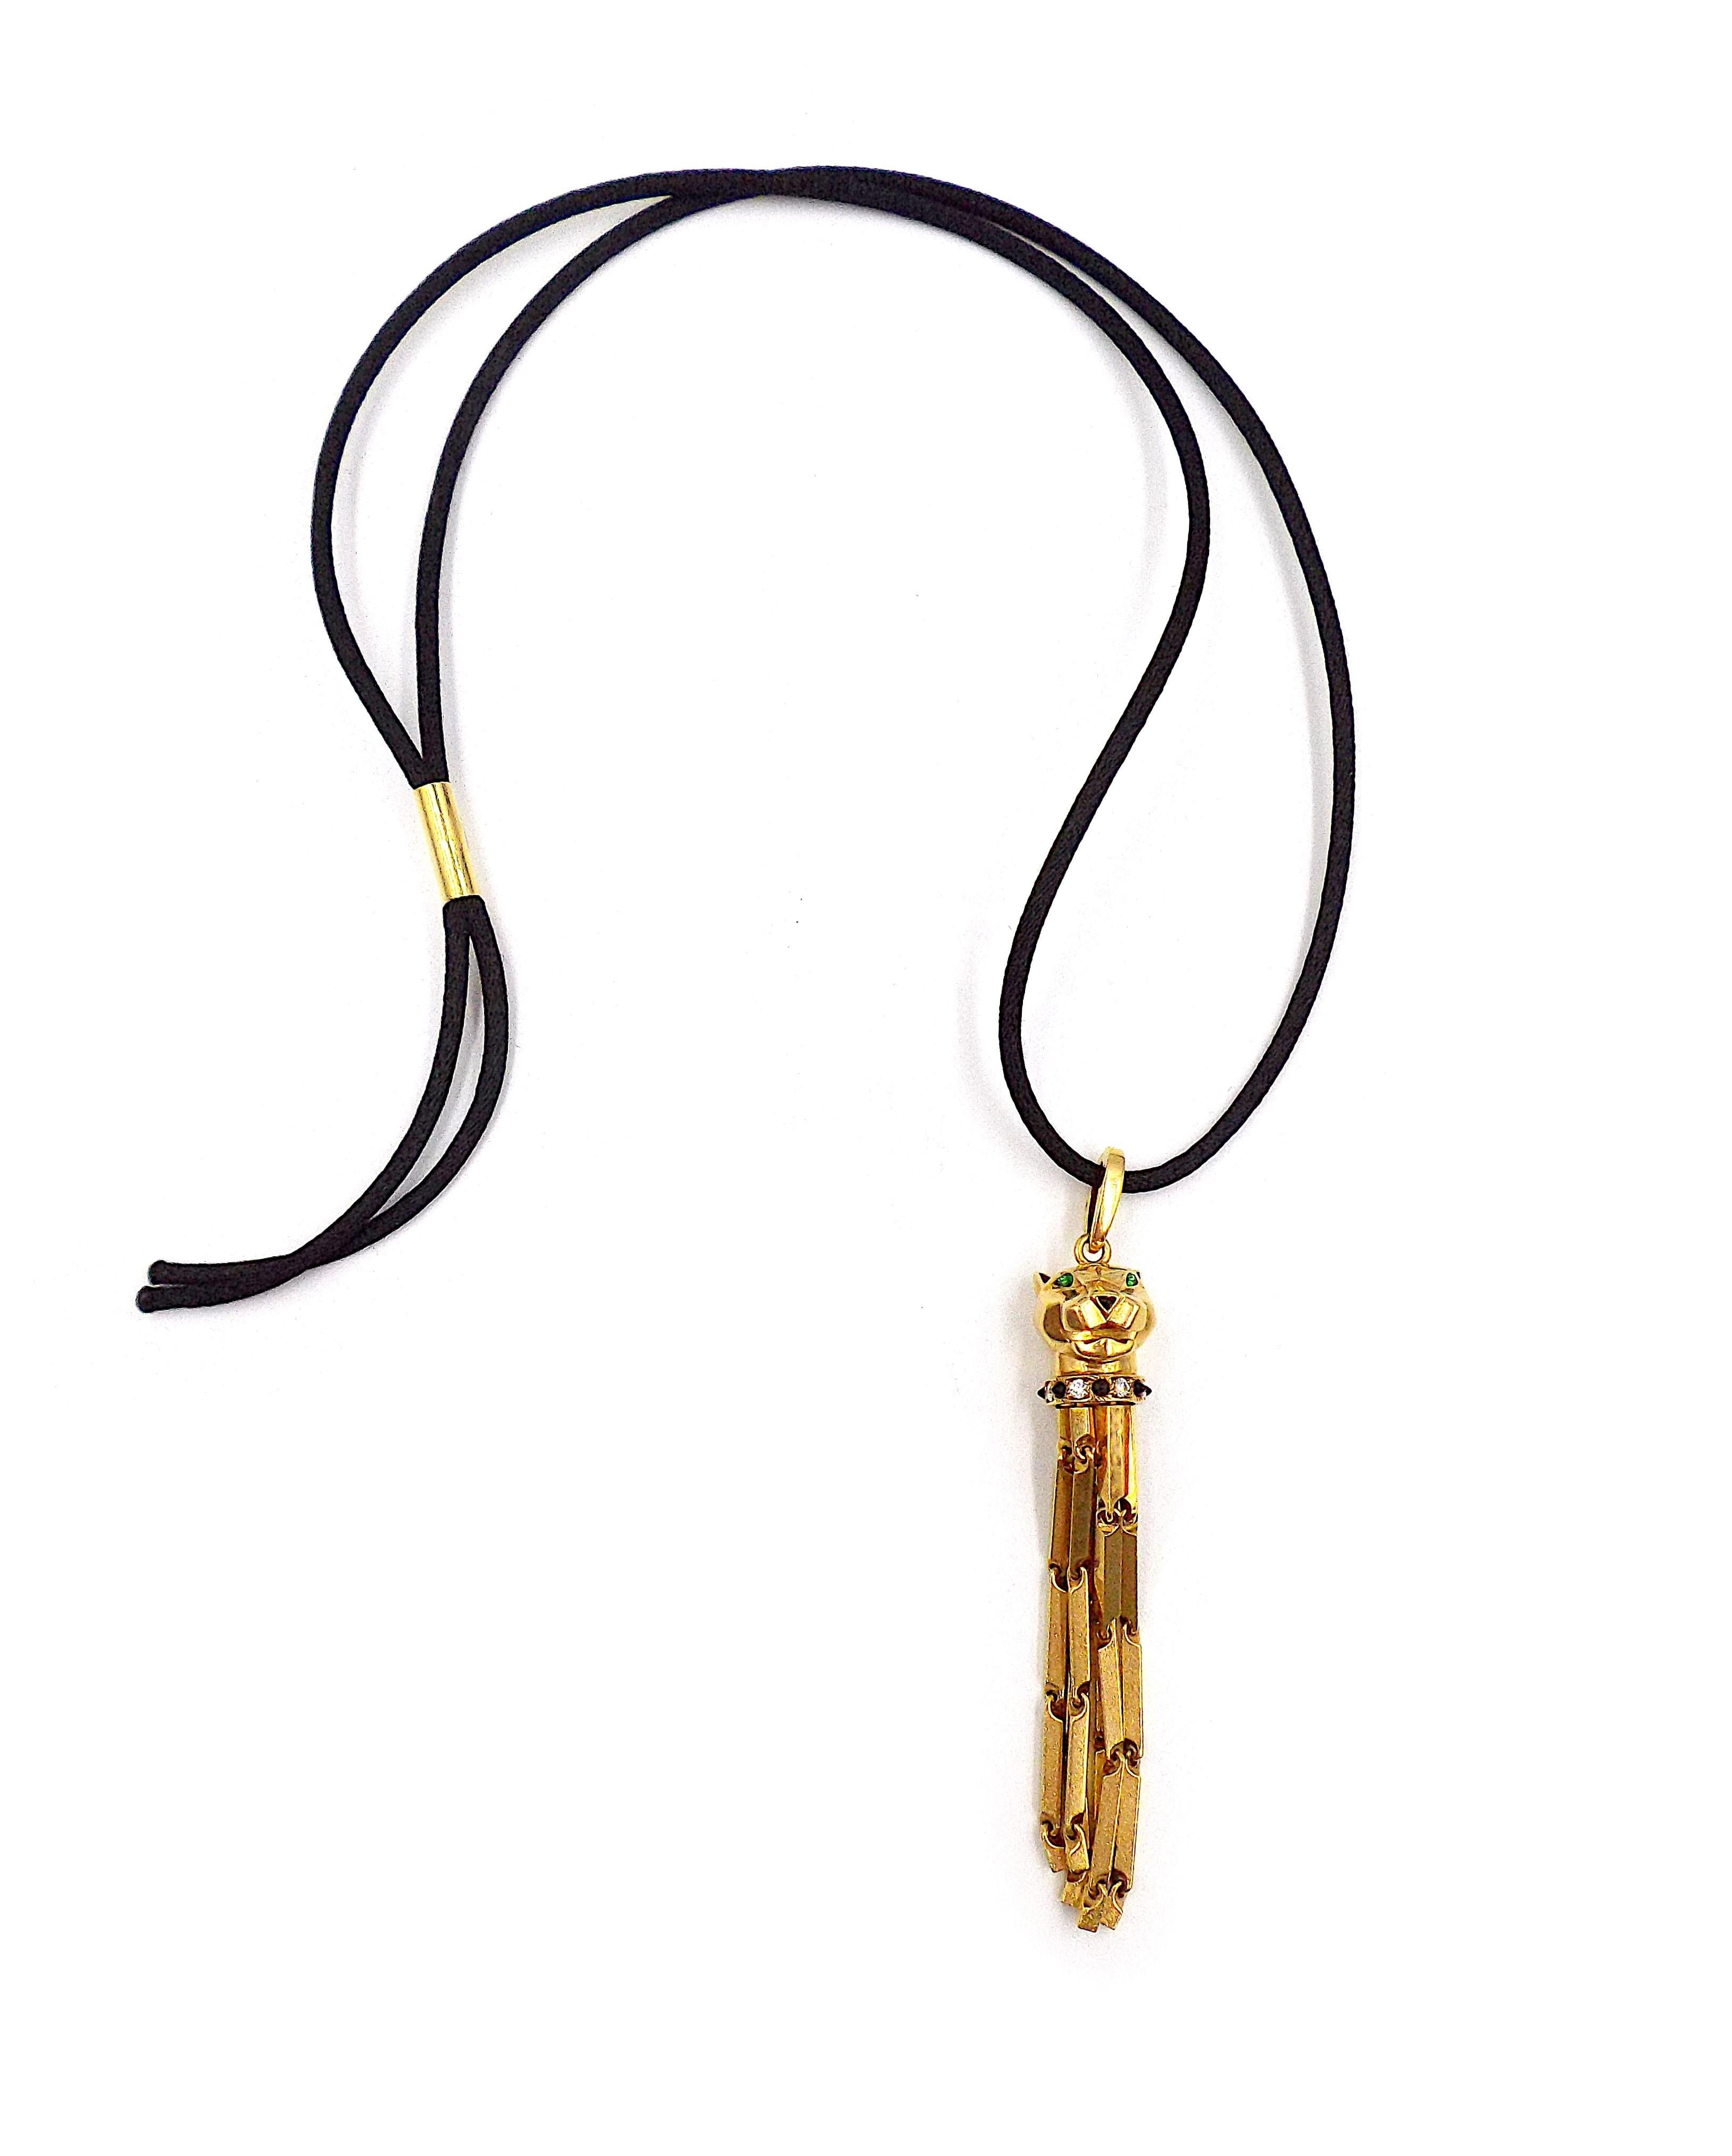 A modern Cartier necklace featuring a gold pendant shaped as a panther head with 6 long tassels on an original black cord with a gold sliding clasp. The pendant is decorated with onyx and diamonds, the panther head is set with tsavorite garnet